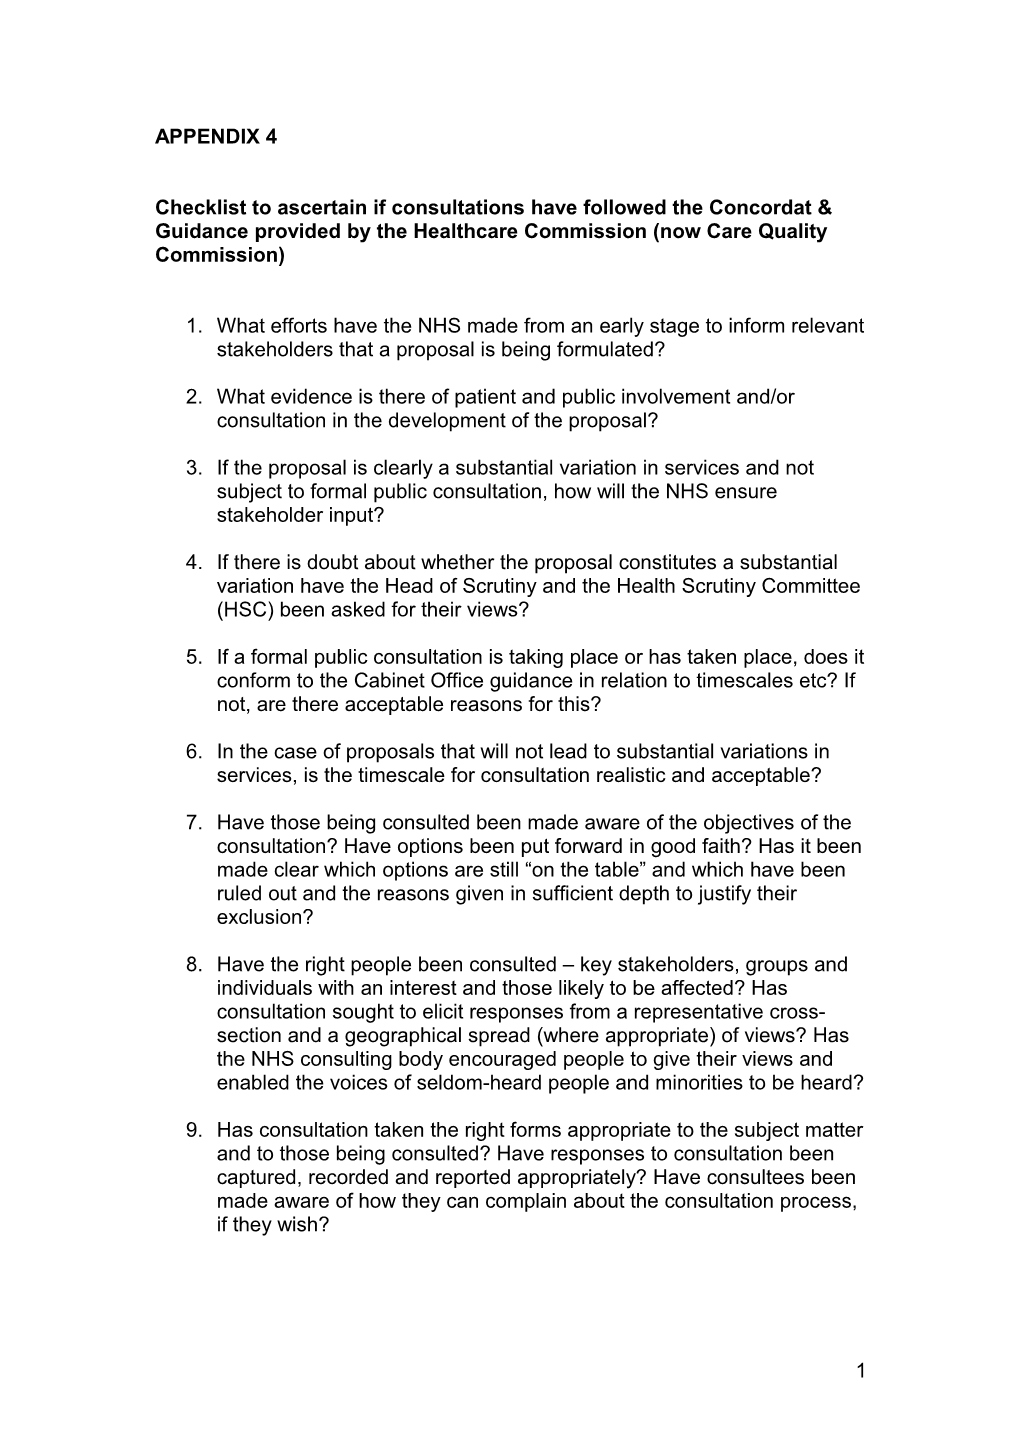 Checklist to Ascertain If Consultations Have Followed the Concordat